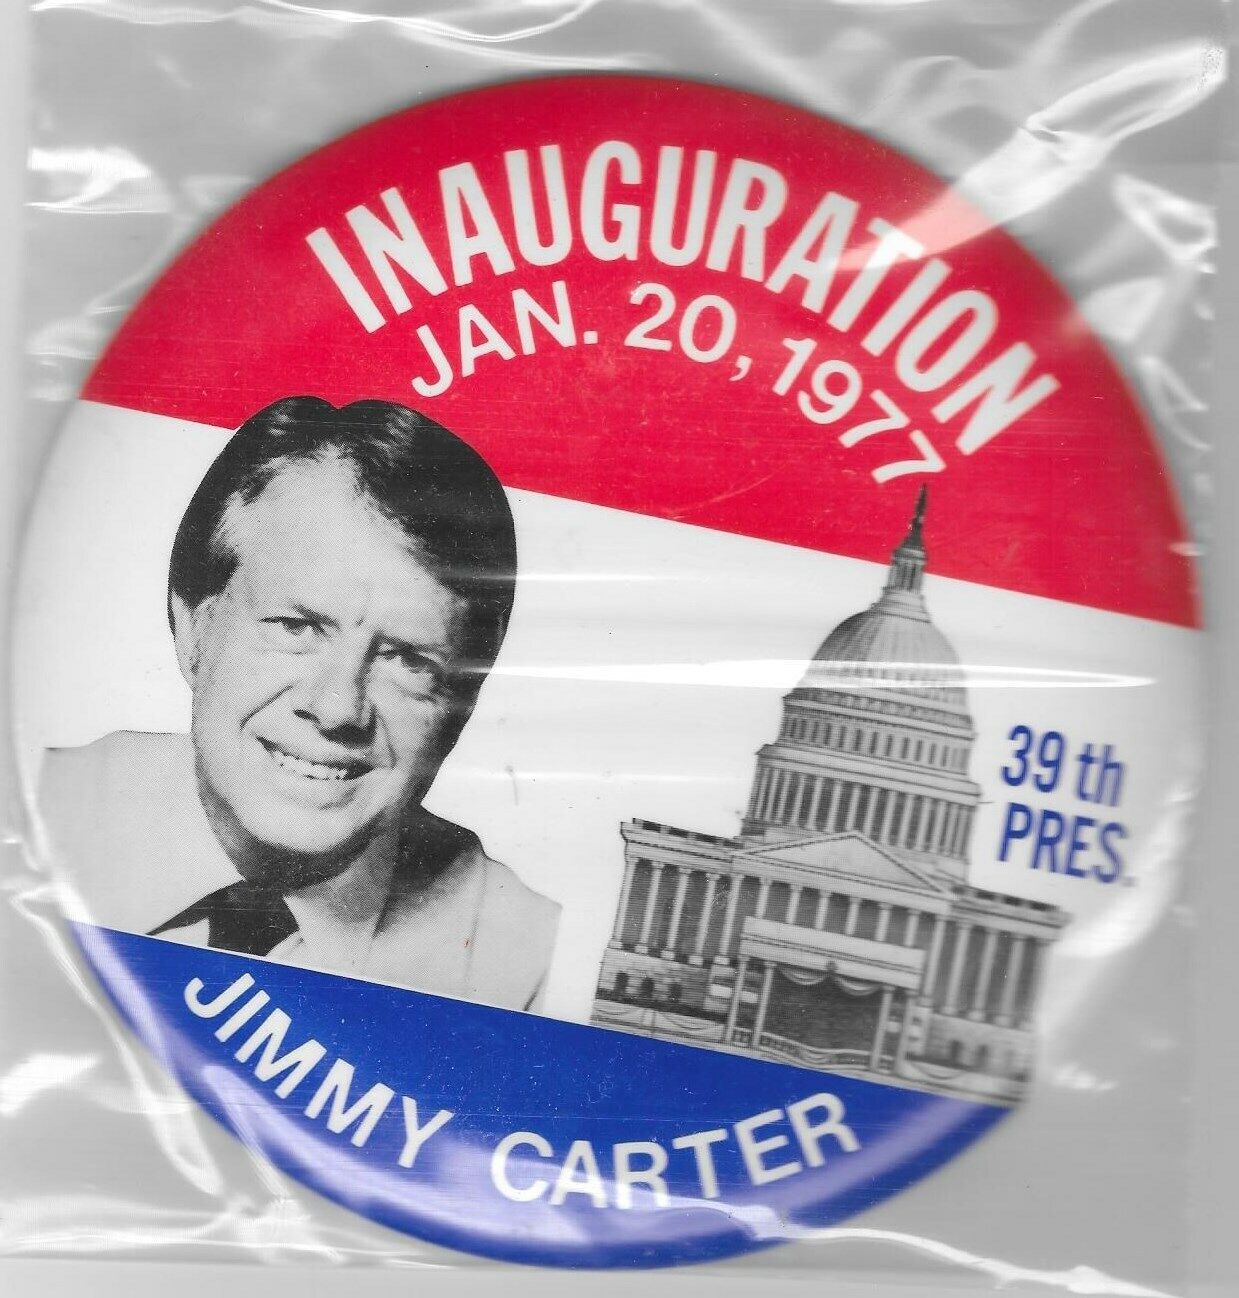 JIMMY CARTER 1977 PRESIDENT INAUGURATION POLITICAL BUTTON PINBACK 6 inch mint